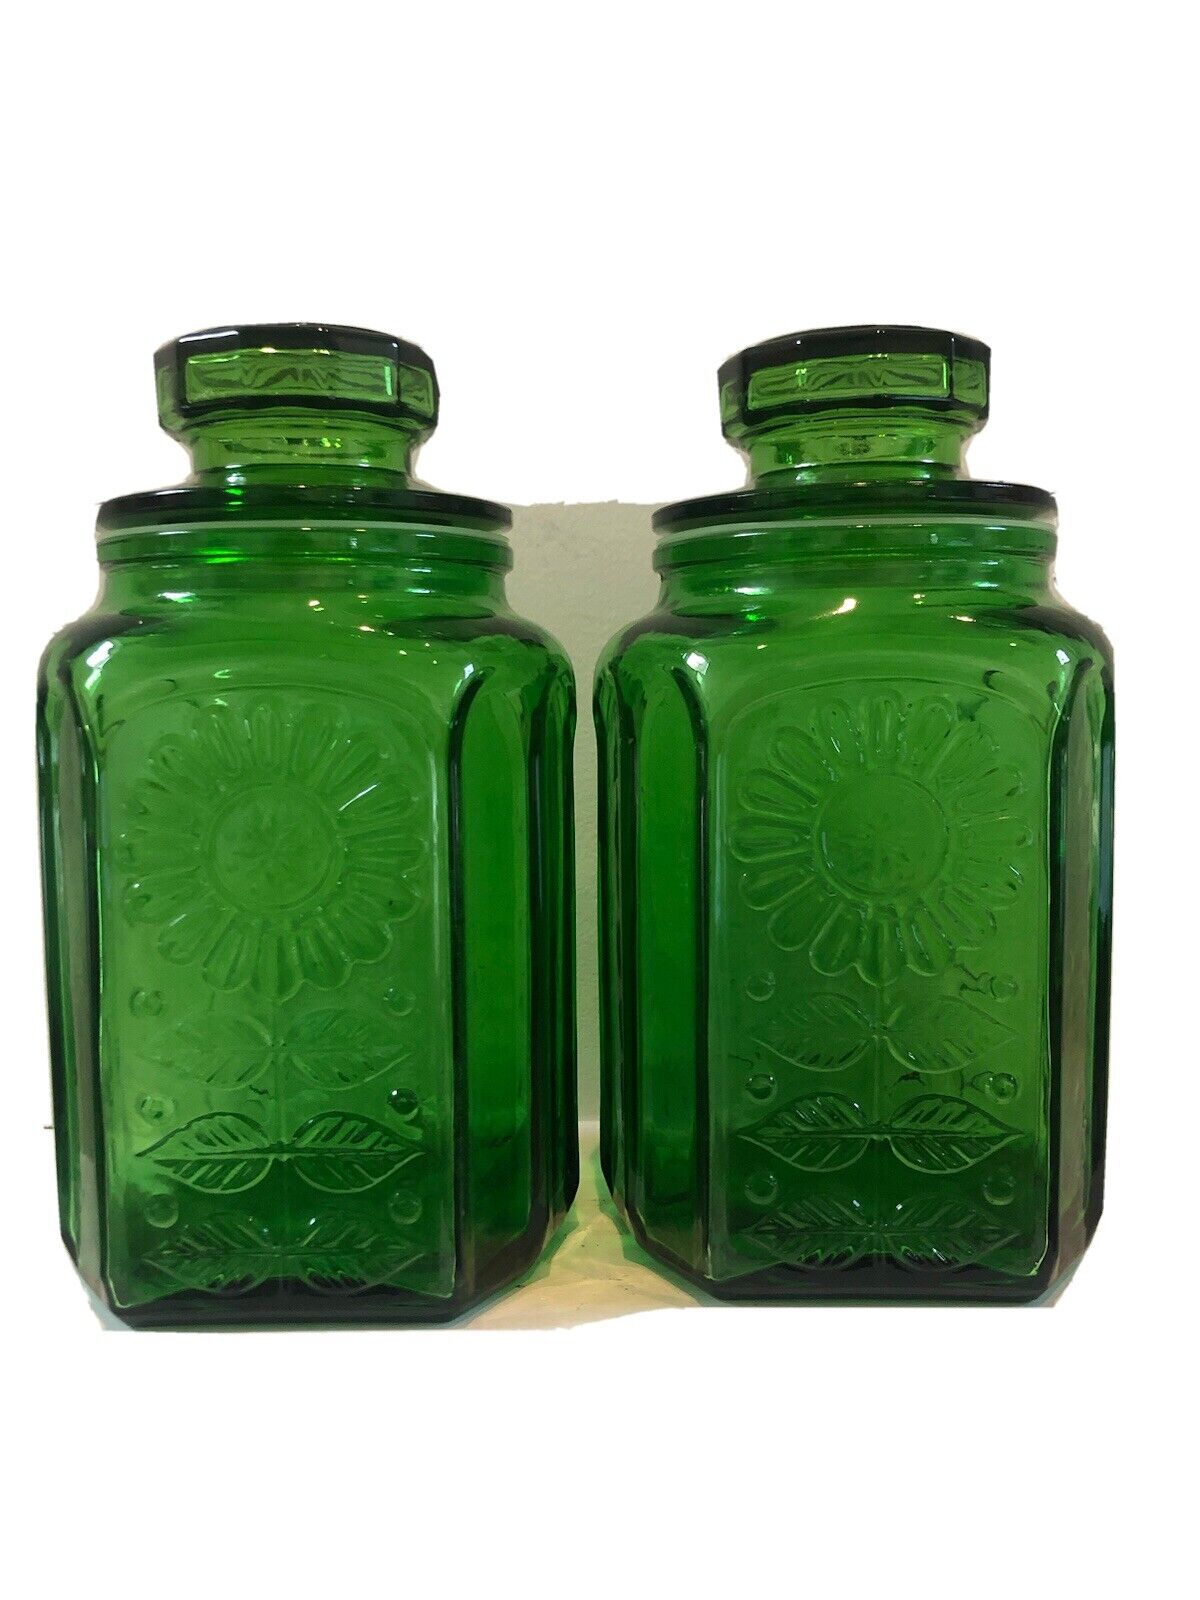 Pair of 9.5” Vintage NJ Wheaton Green Double Sided Apothecary Jars & Lids